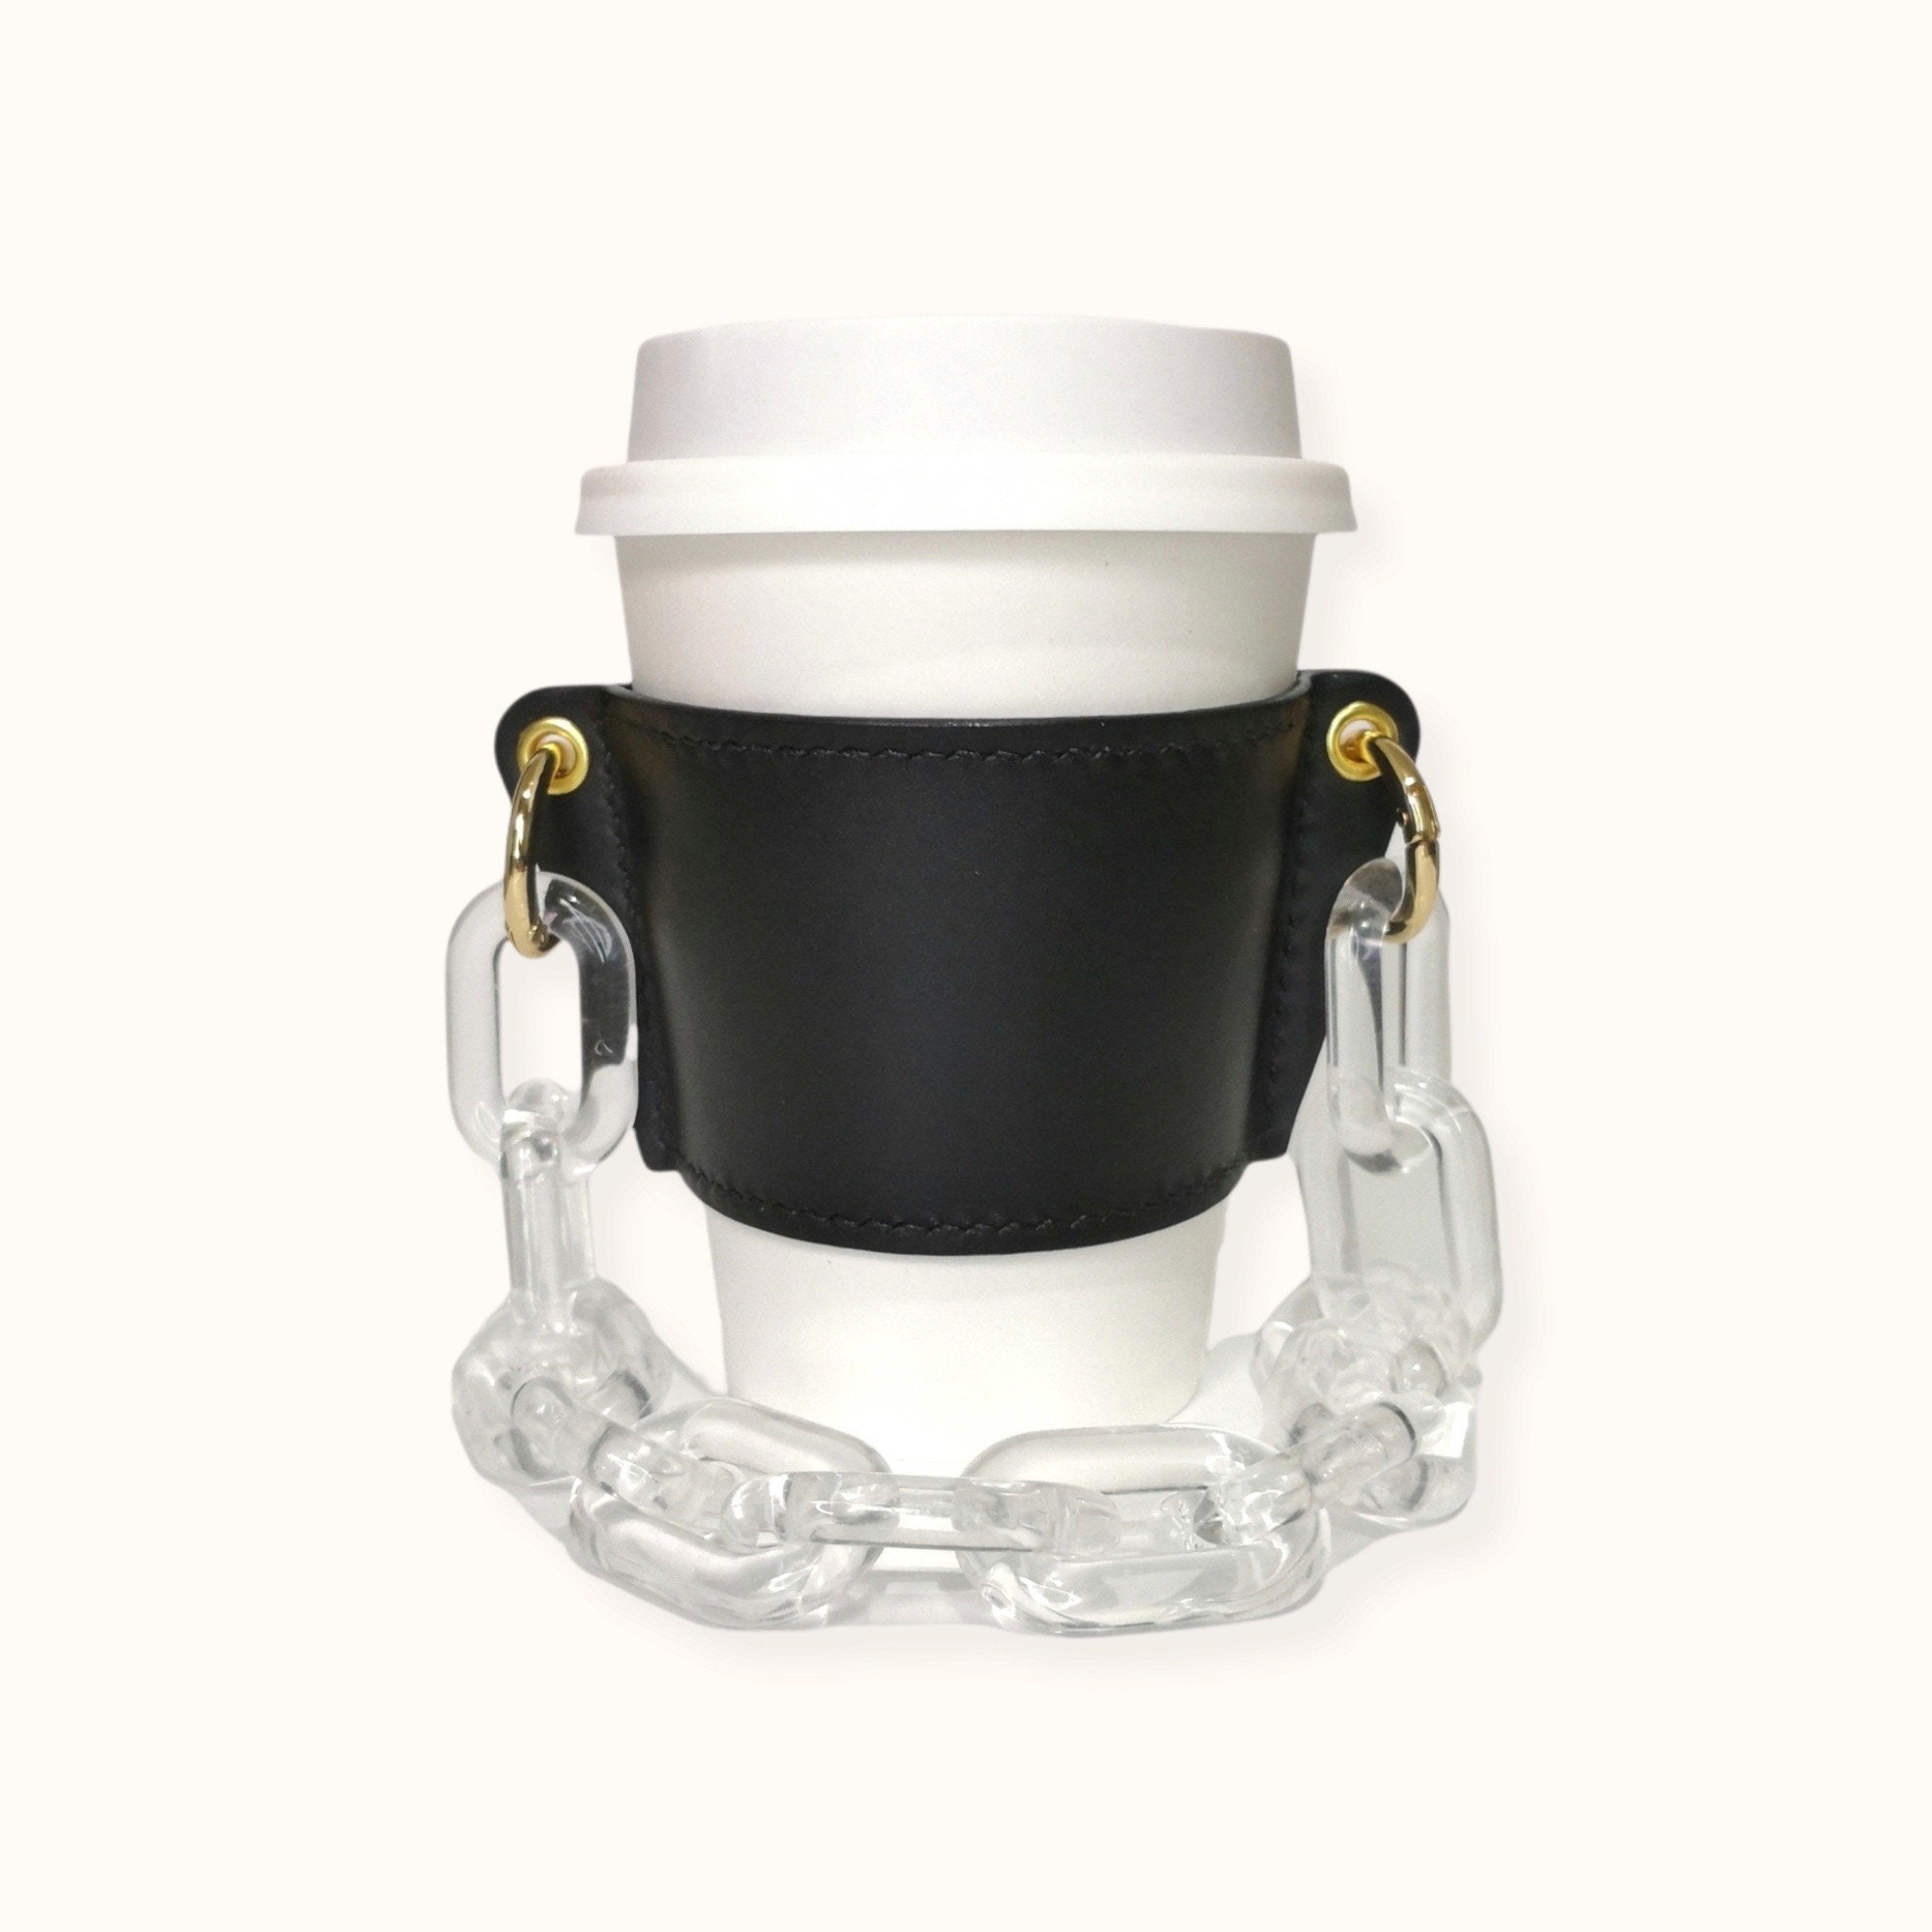 LEATHER Reusable Cupholder & Chain Handmade Coffee Cup Holder Sleeve Black  With Clear Chain Strap Handle FEM THIRSTY 